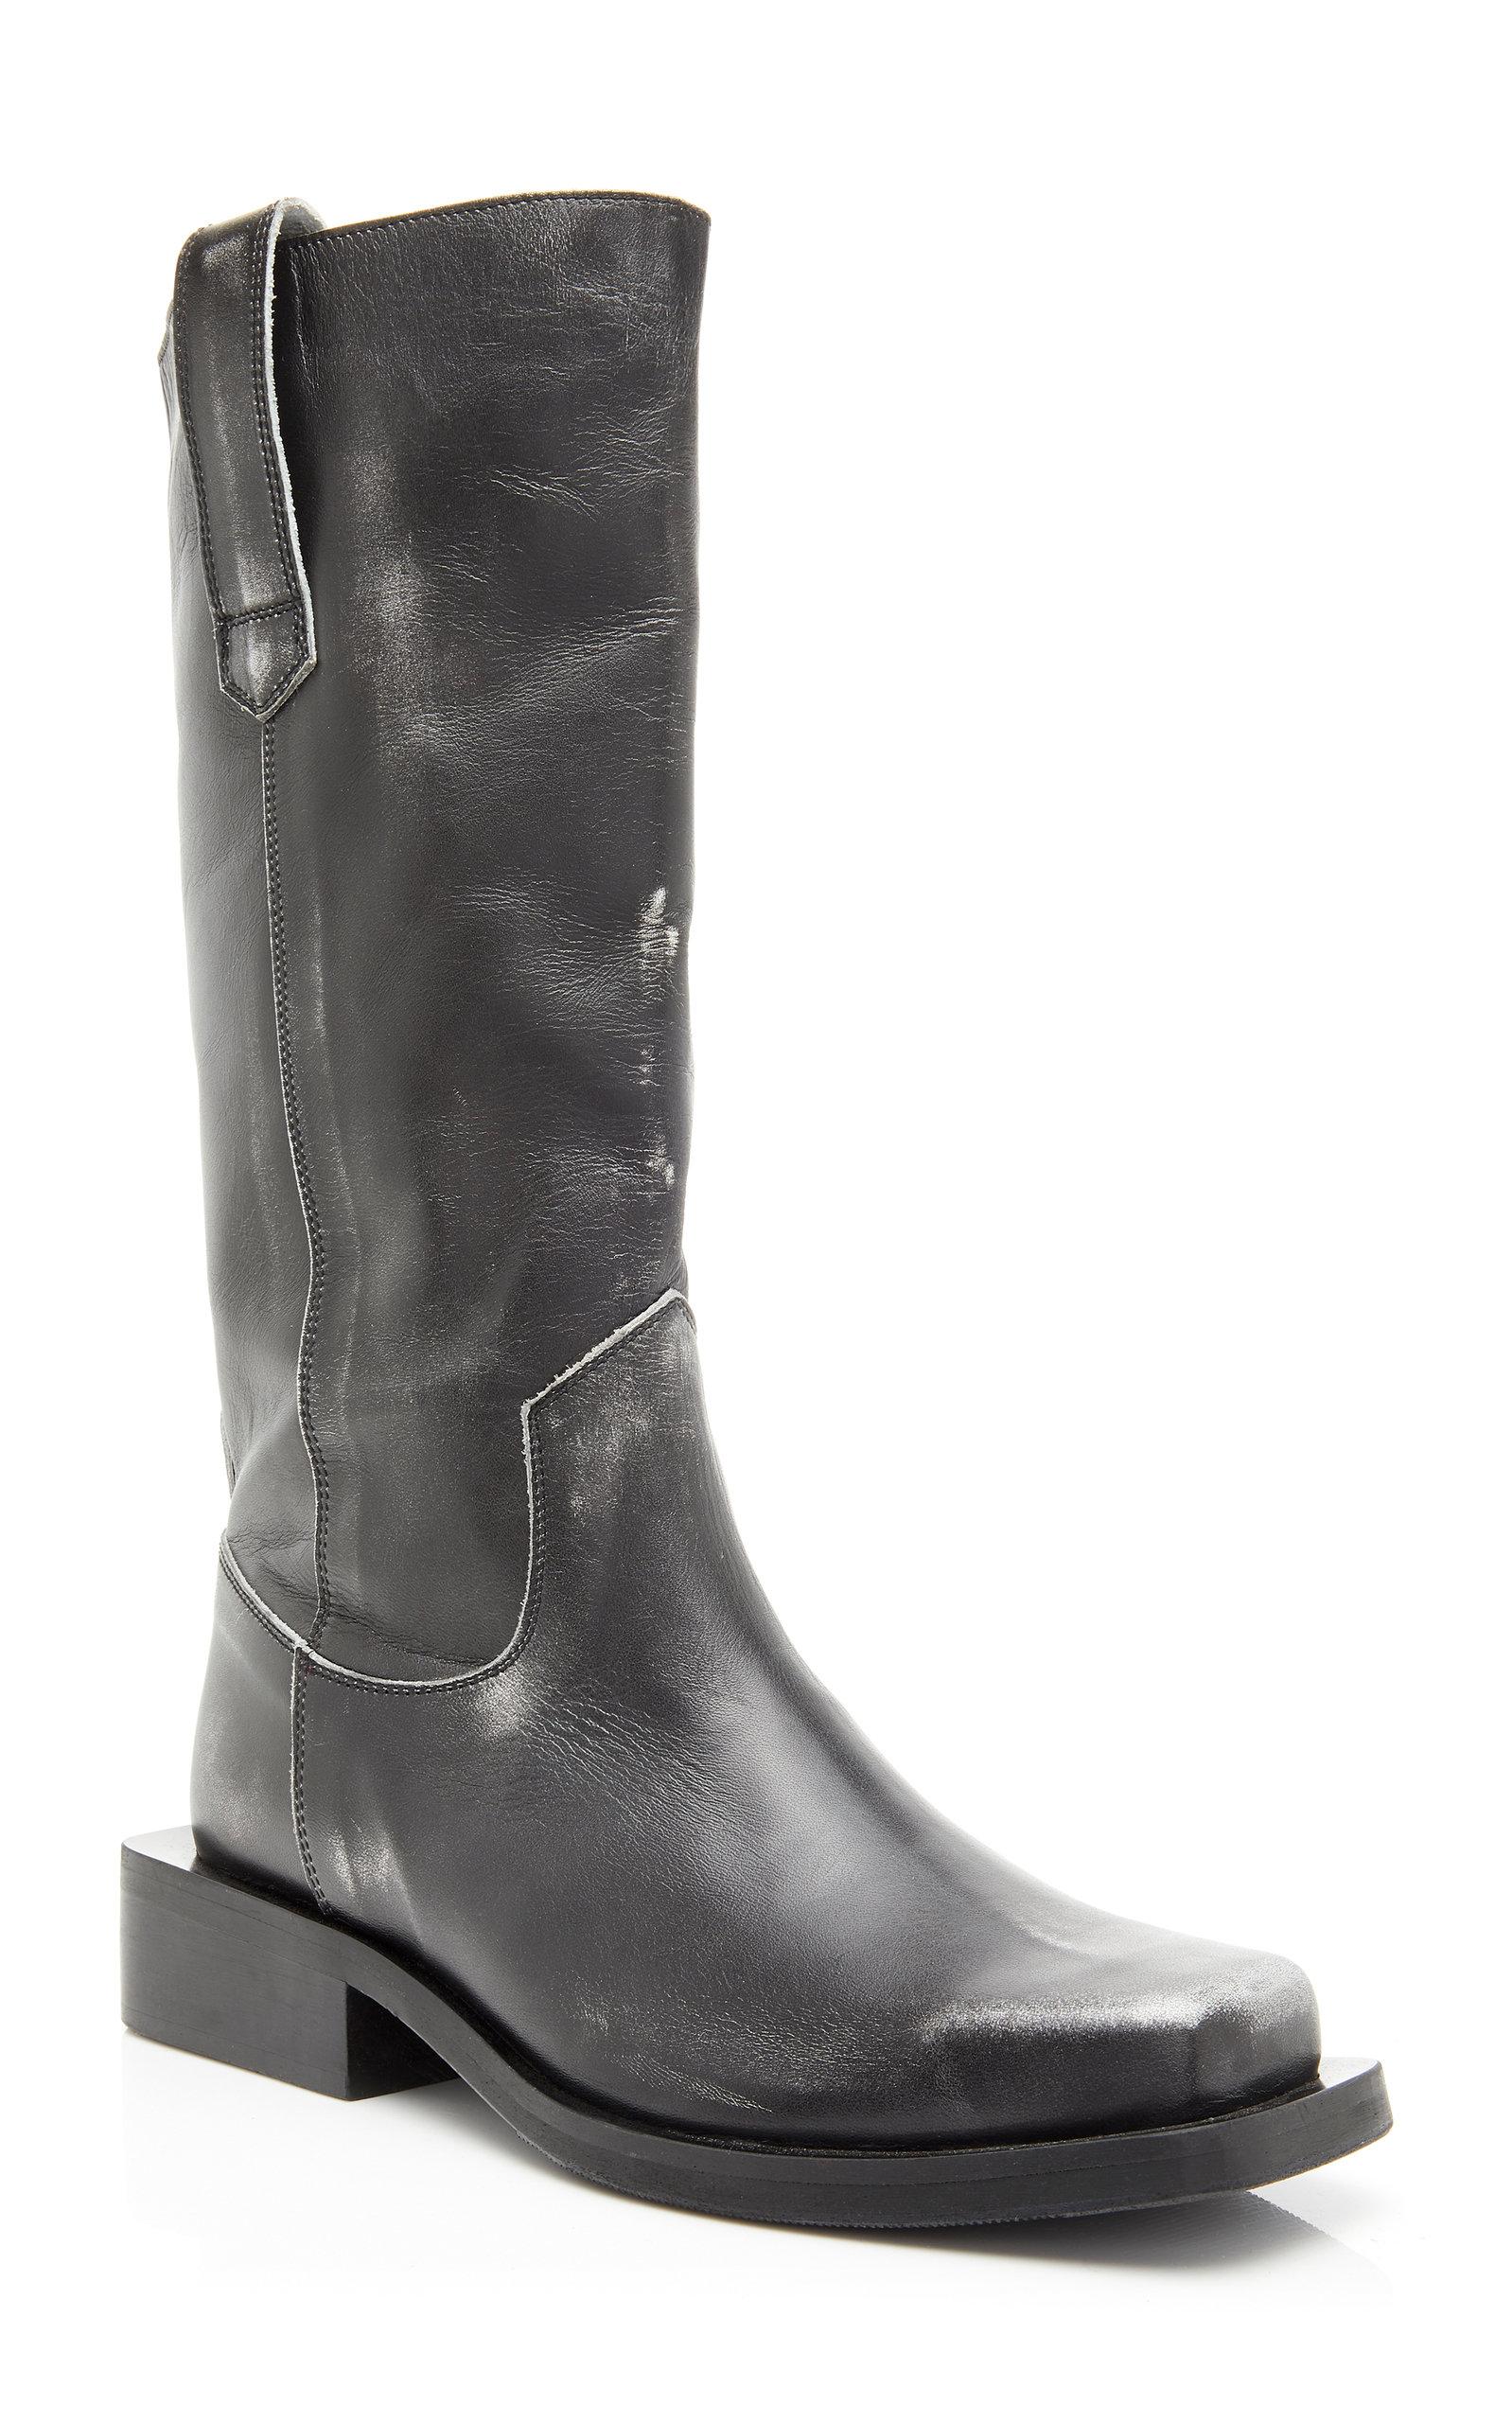 Ganni Exclusive Distressed Leather Motorcycle Boots in Black | Lyst